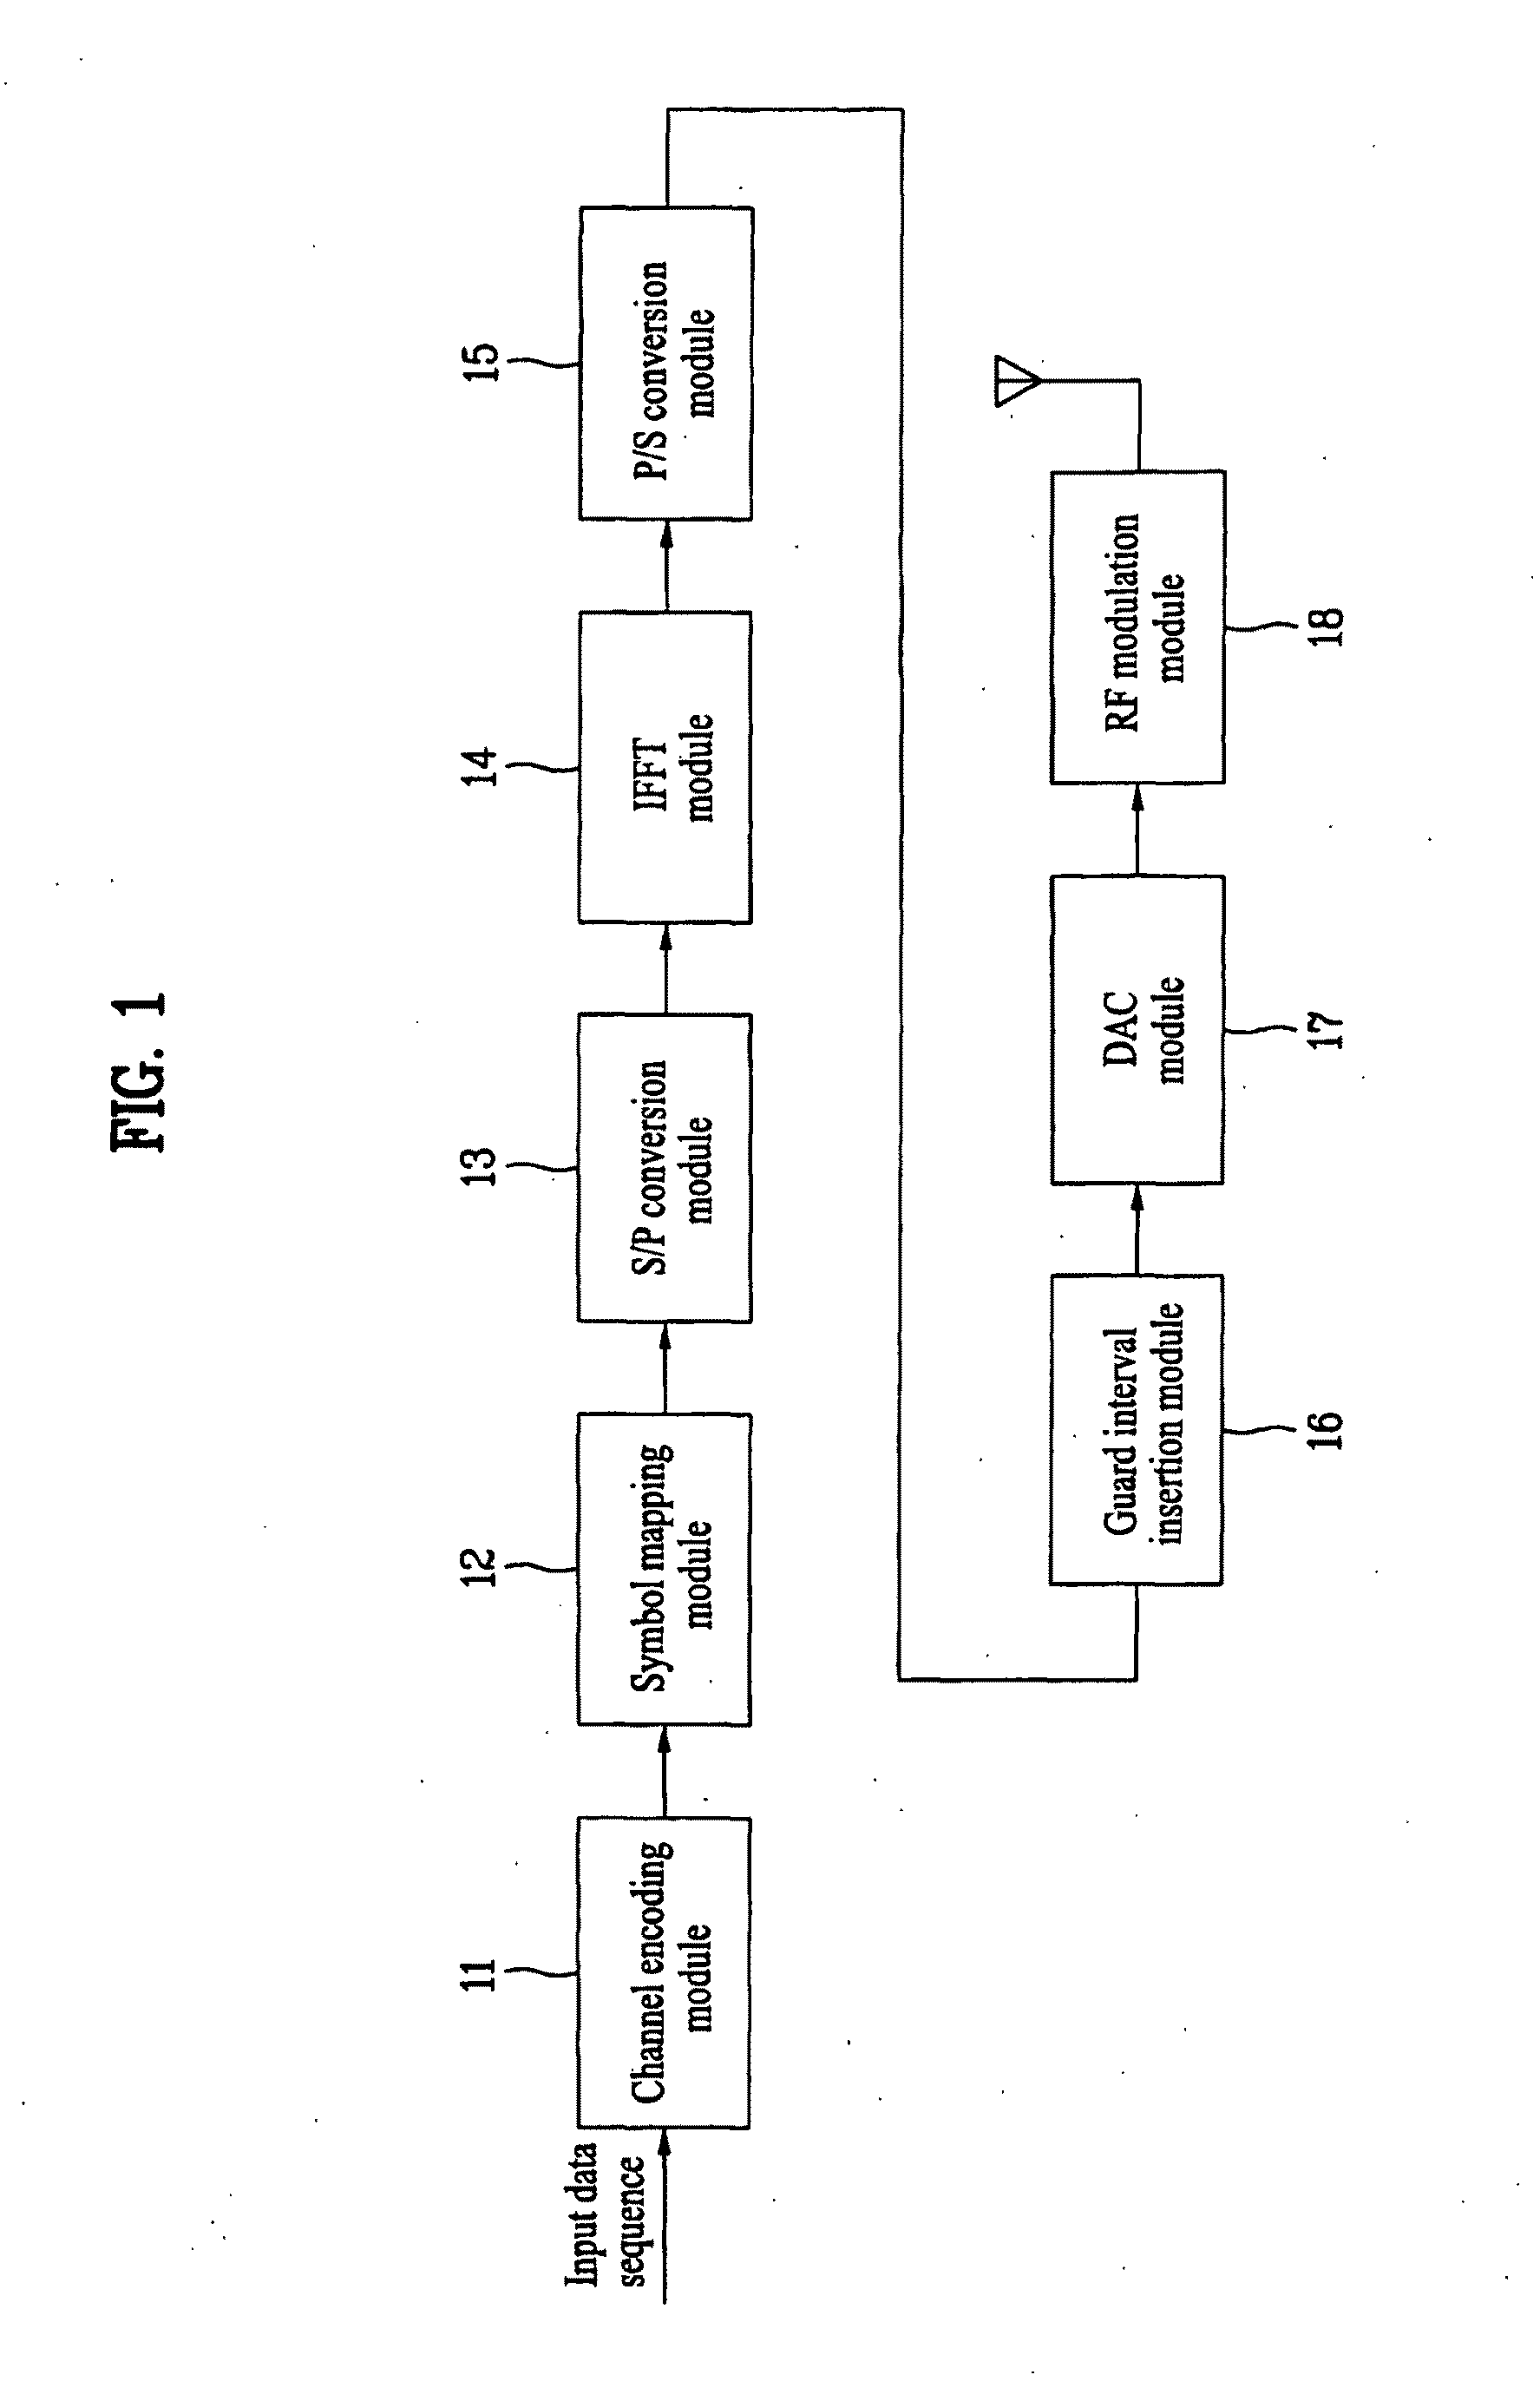 Method oftransmitting and processing data and transmitter in a wireless communication system